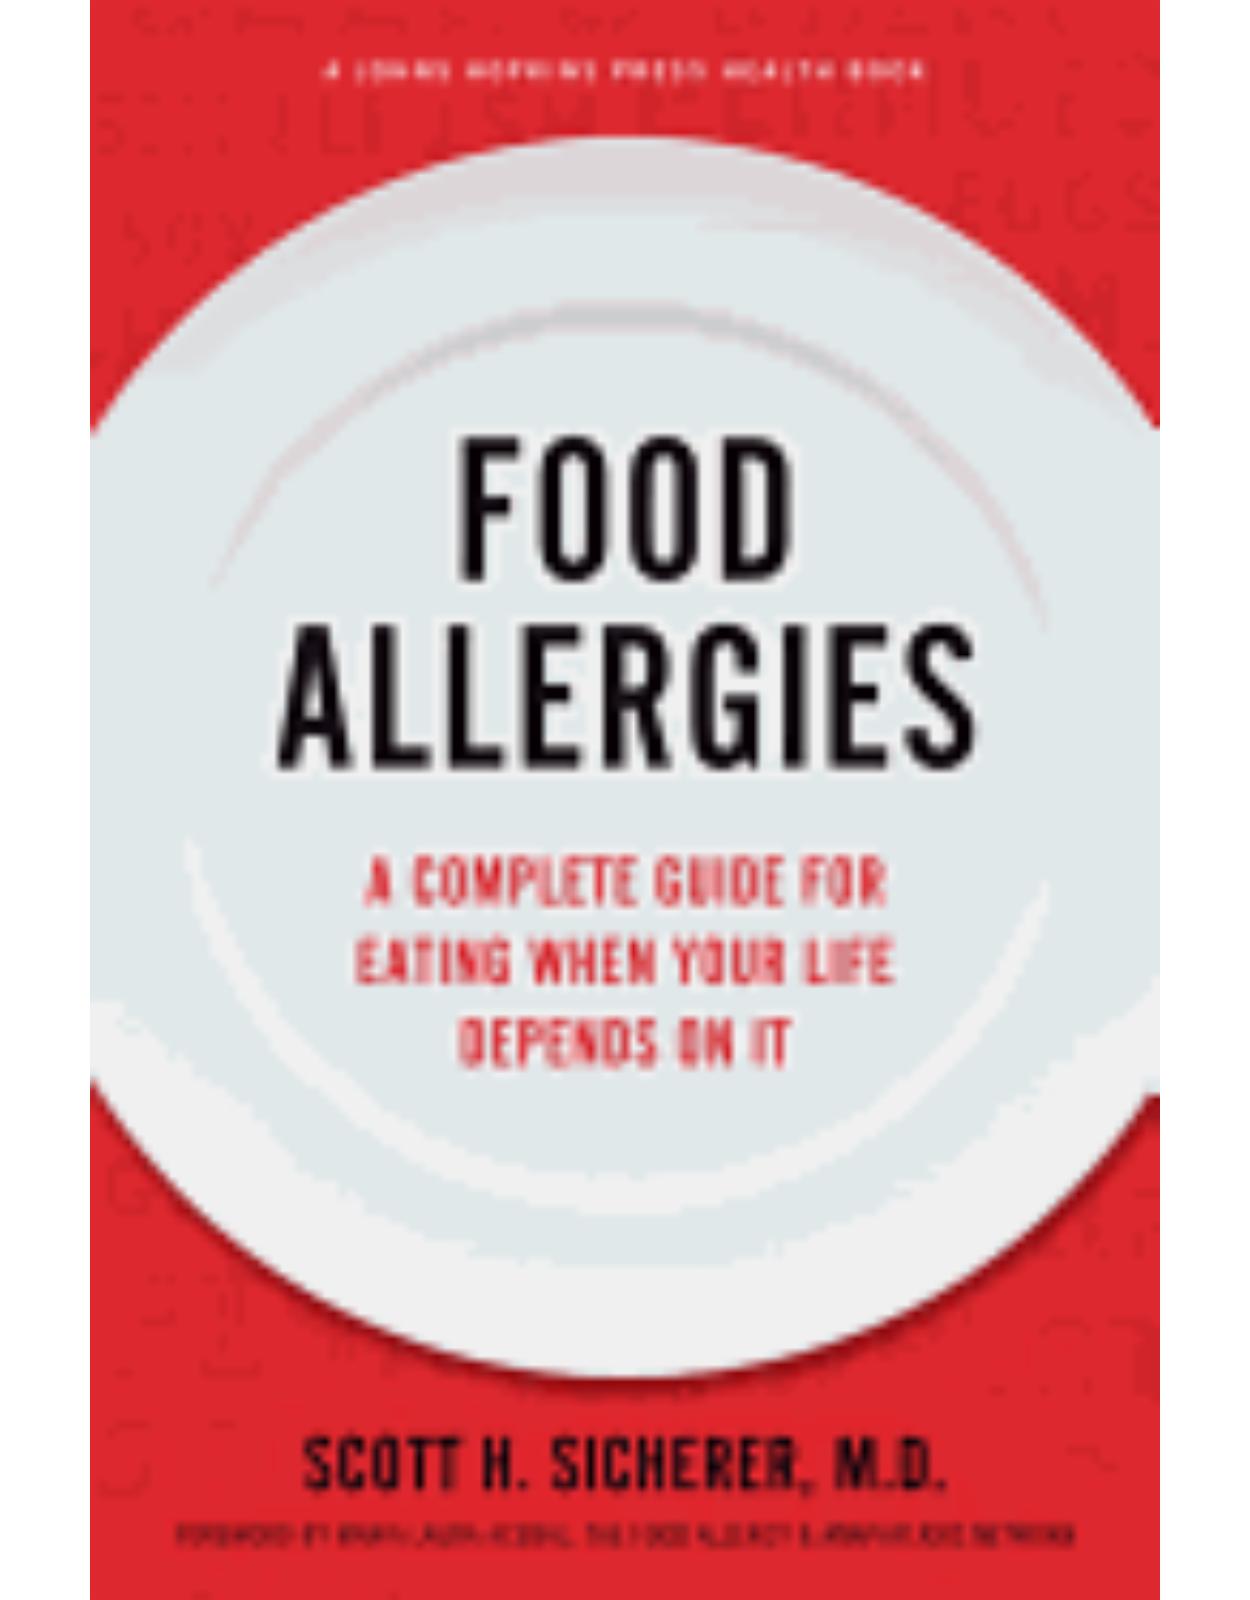 Food Allergies. A Complete Guide for Eating When Your Life Depends on It